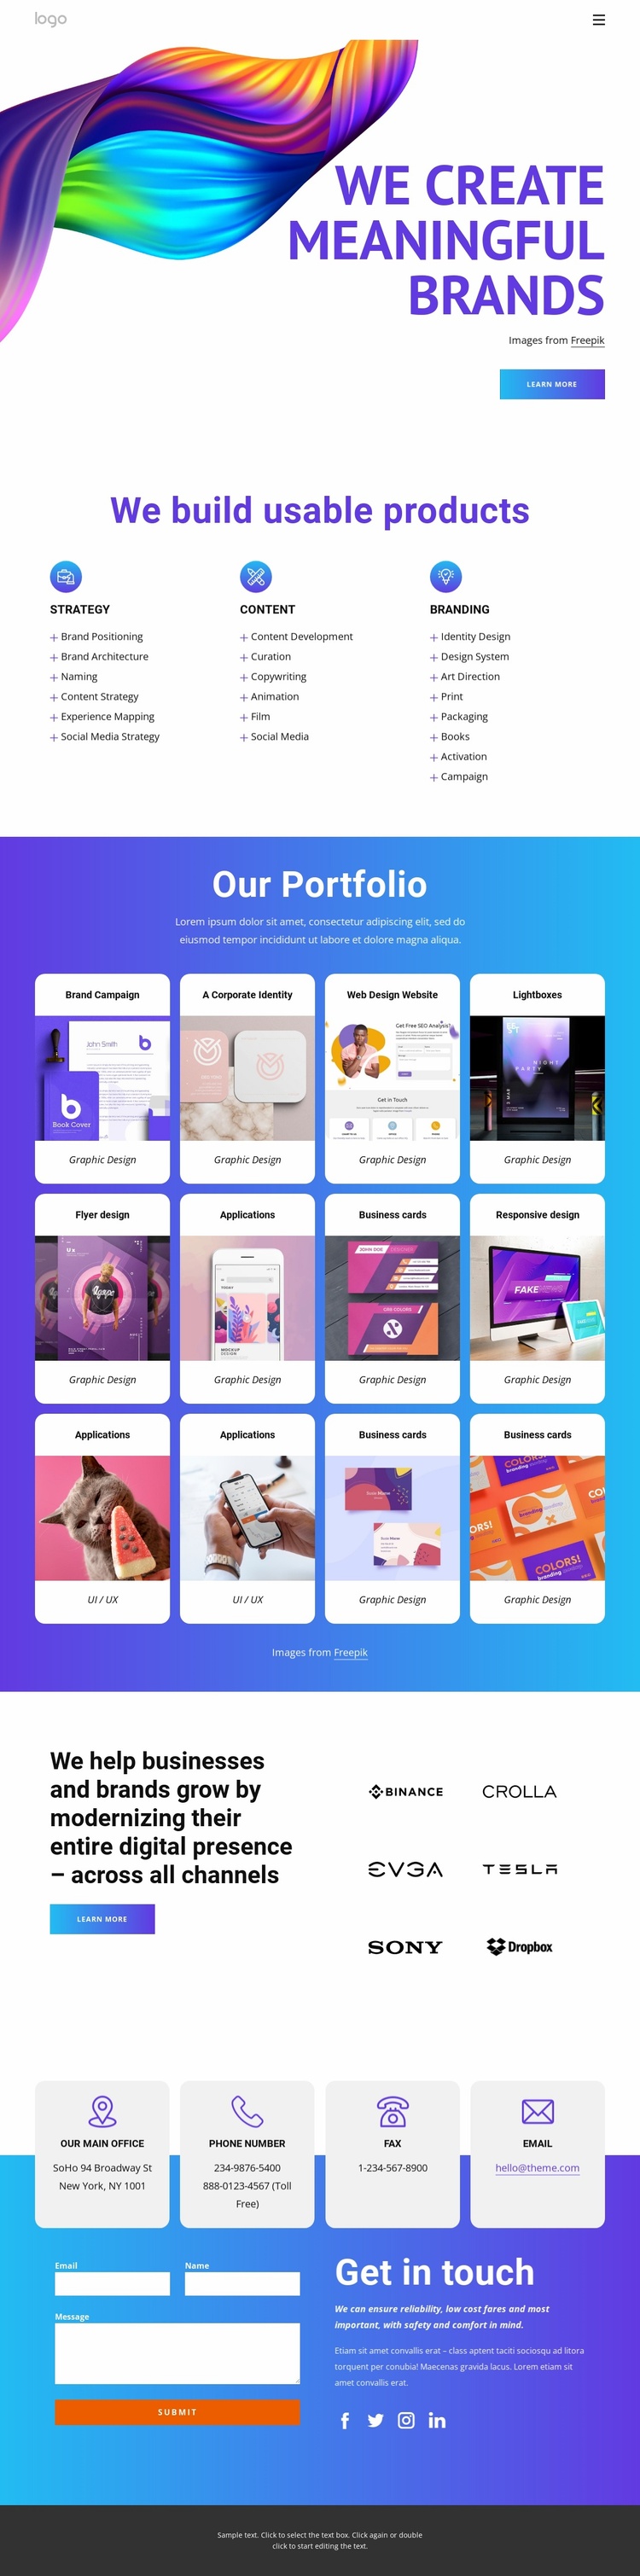 We create meaningful brands Landing Page